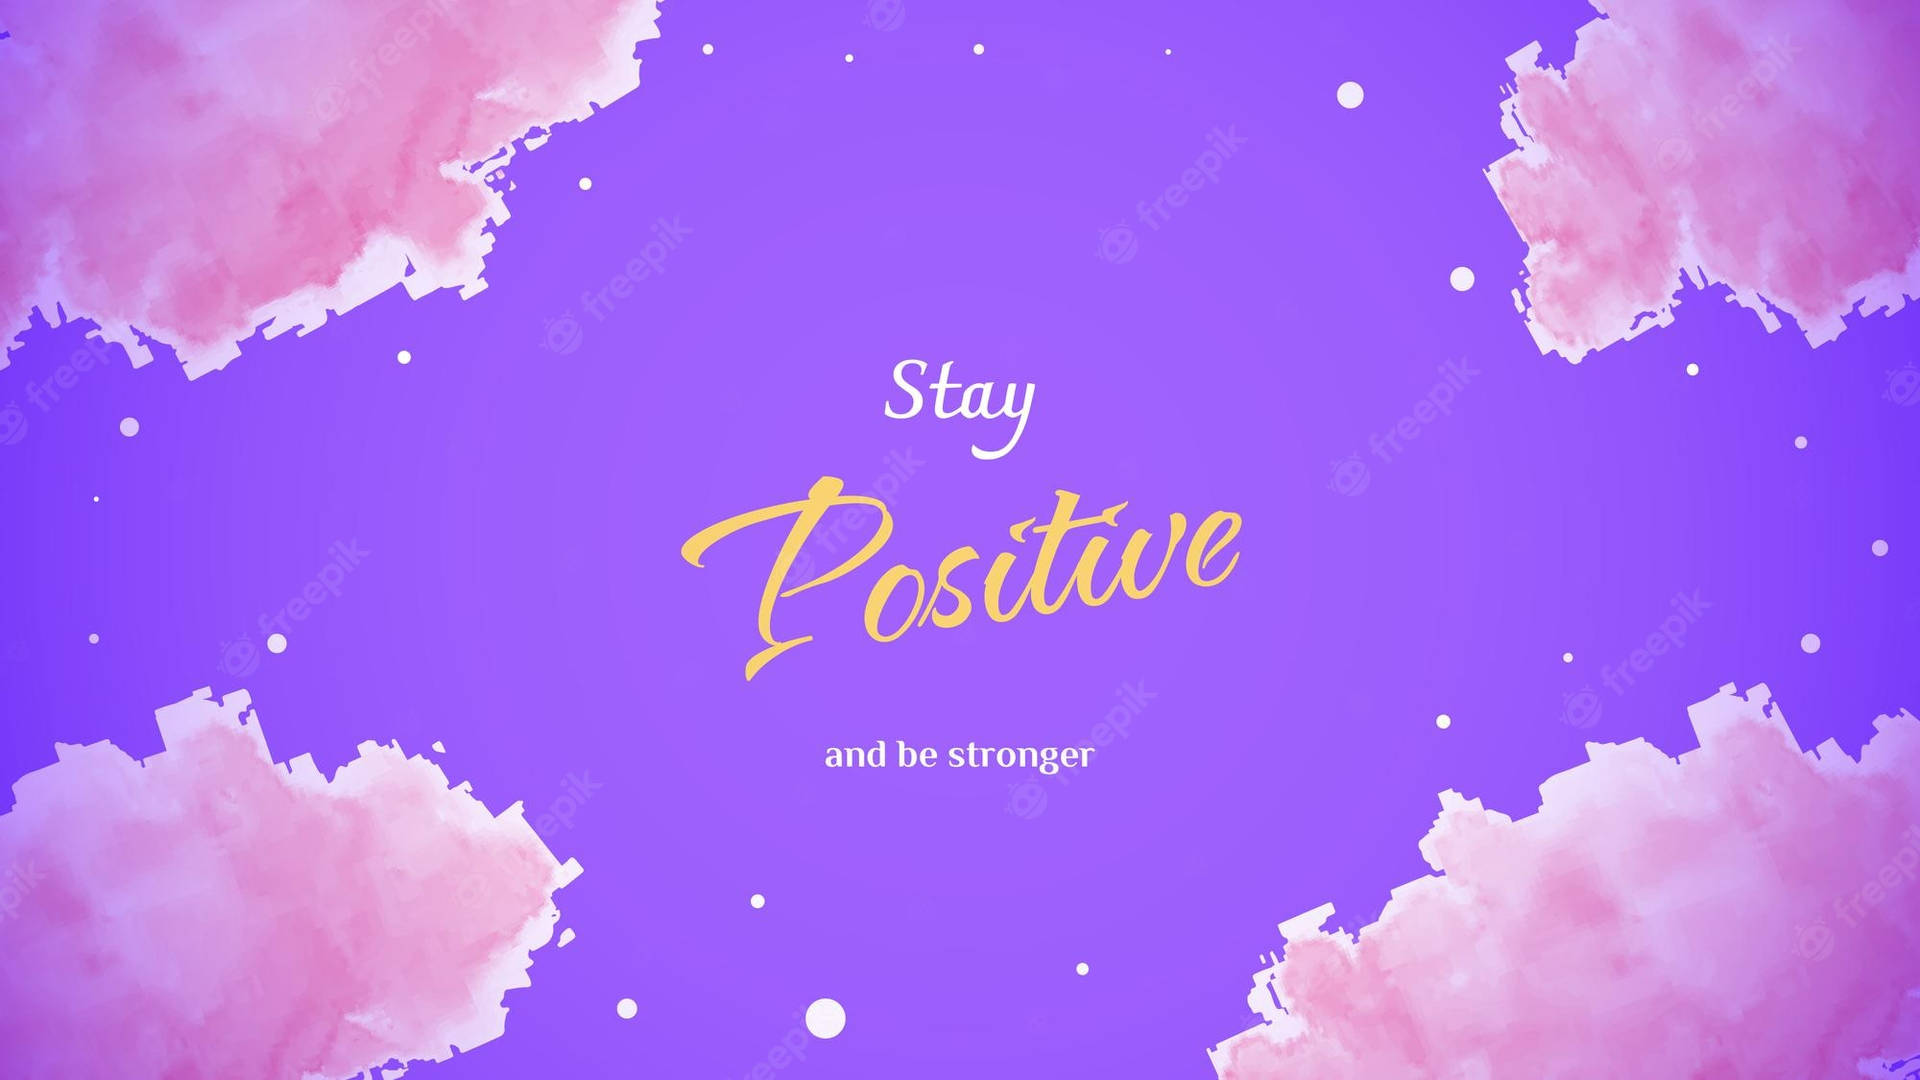 Stay positive wallpaper  Positive wallpapers Inspirational quotes  wallpapers Happy day quotes